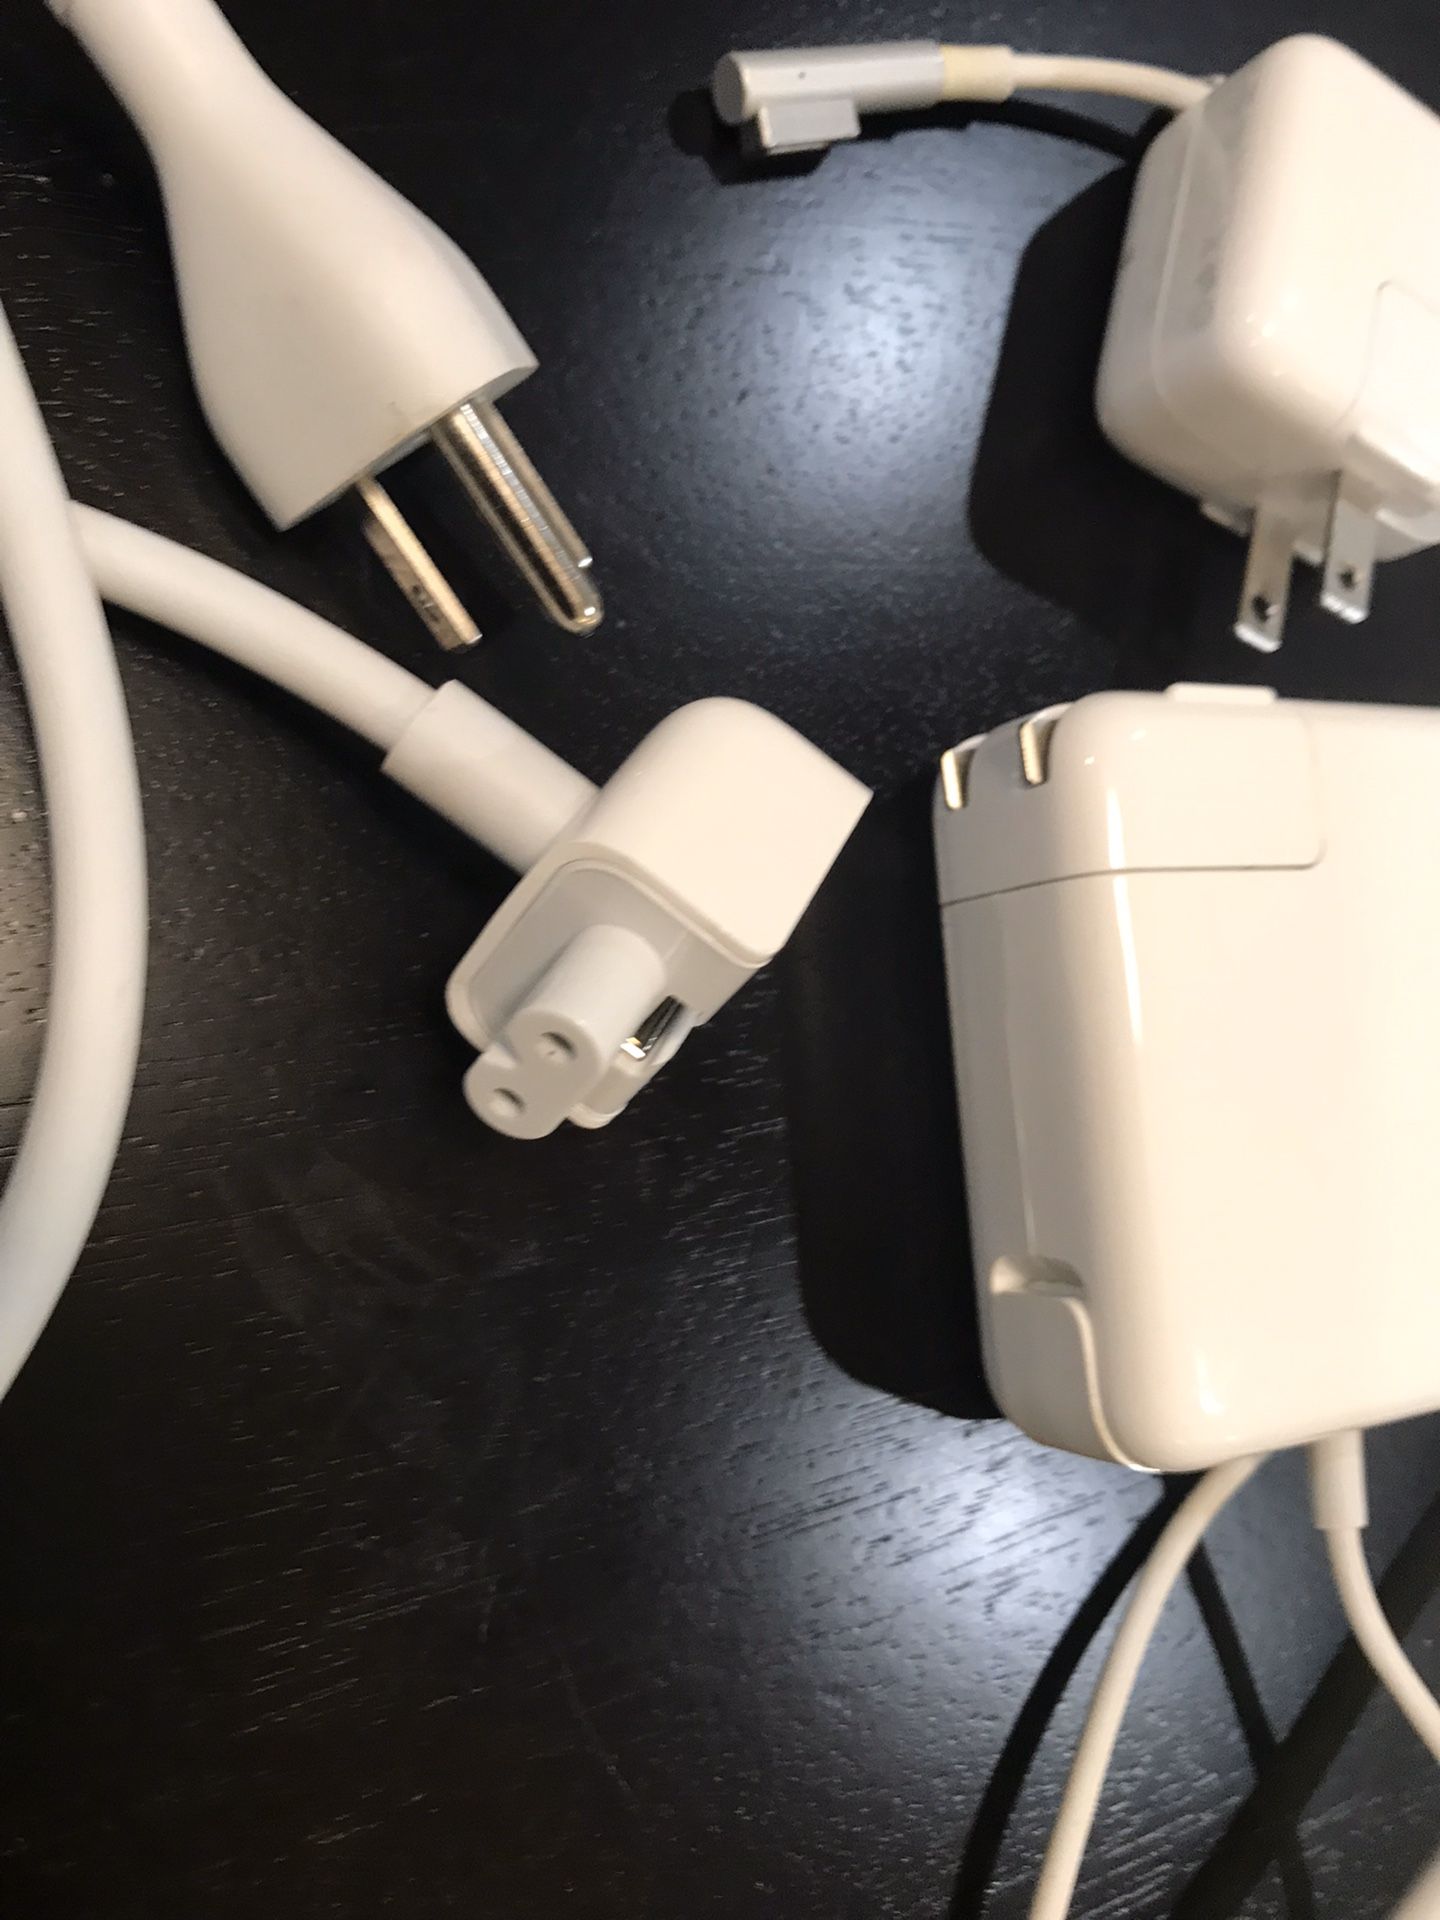 MacBook Pro charger and iPad charger with extension cord